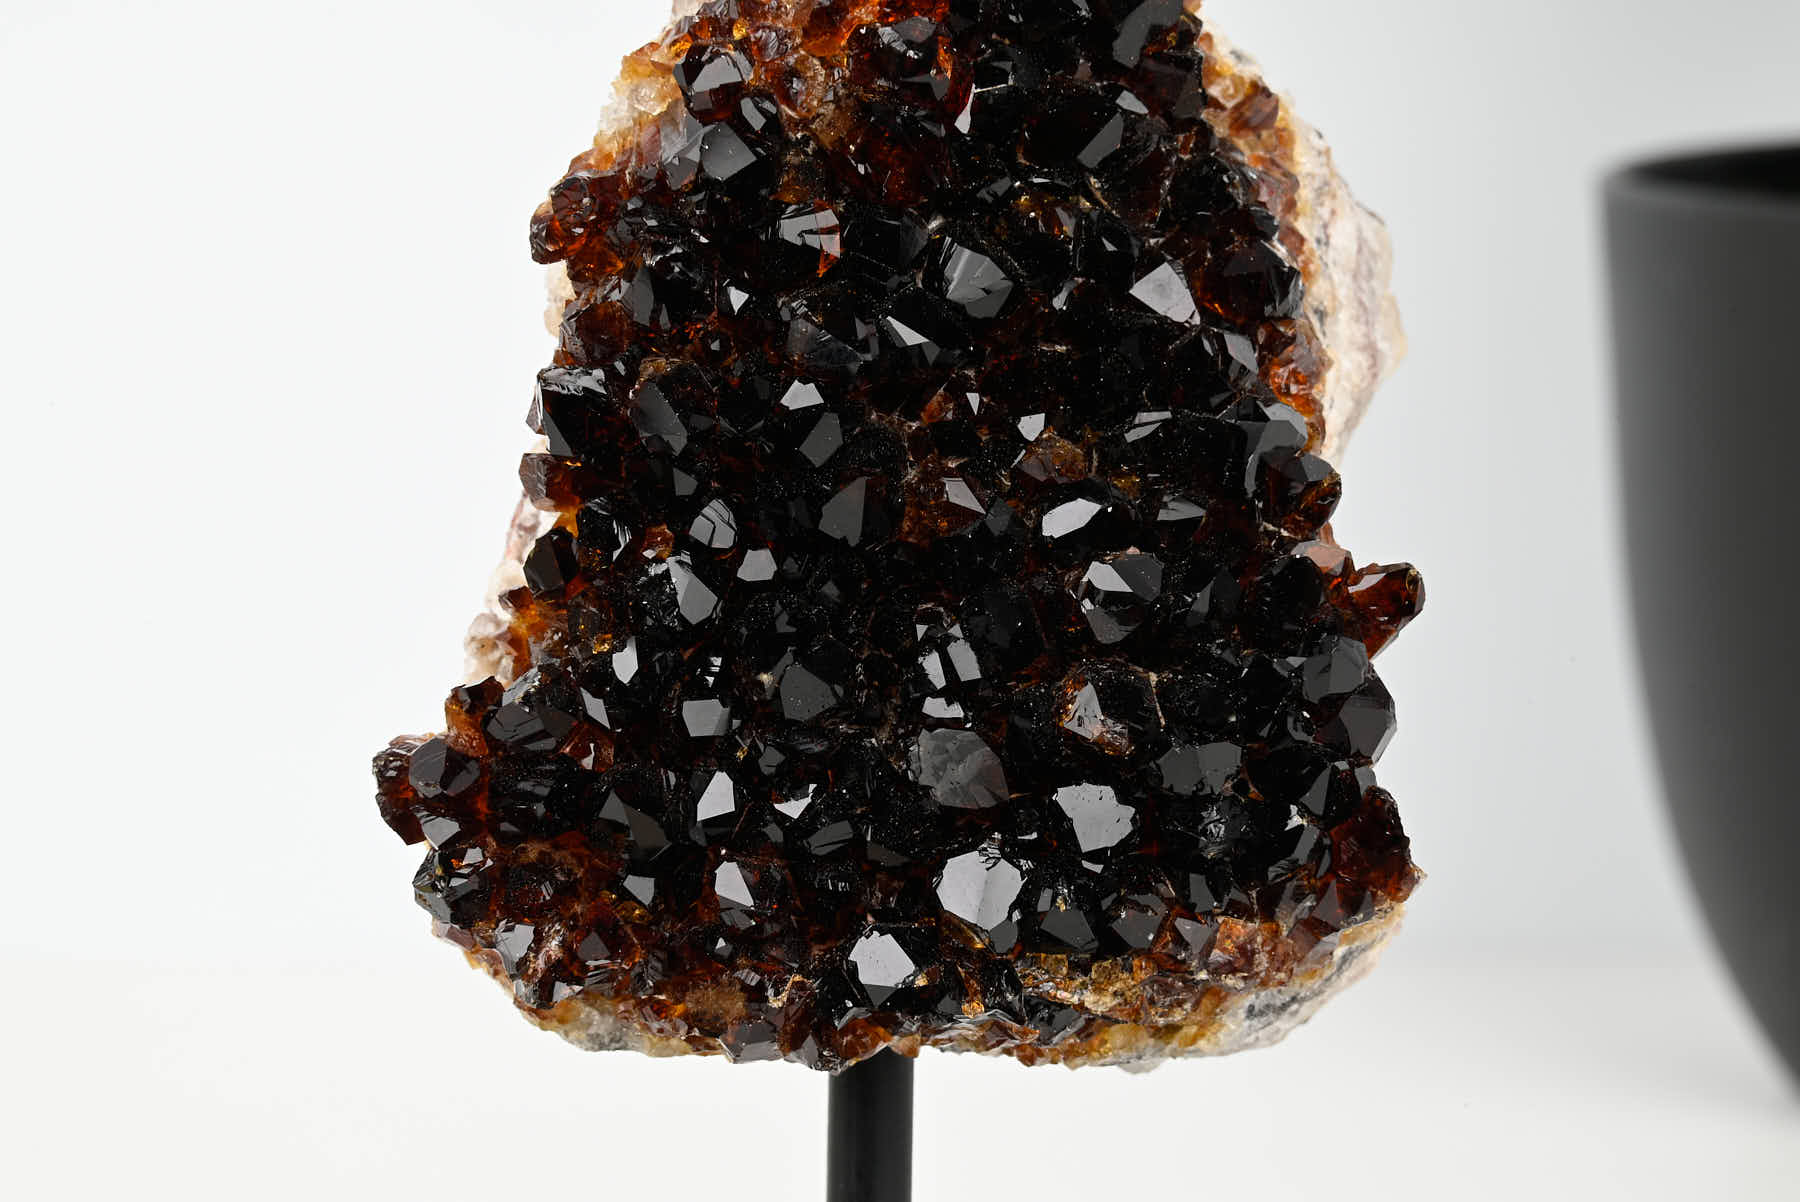 Extra Quality Citrine Cluster on Stand - Small 14cm Tall - #CLUSCI-63033